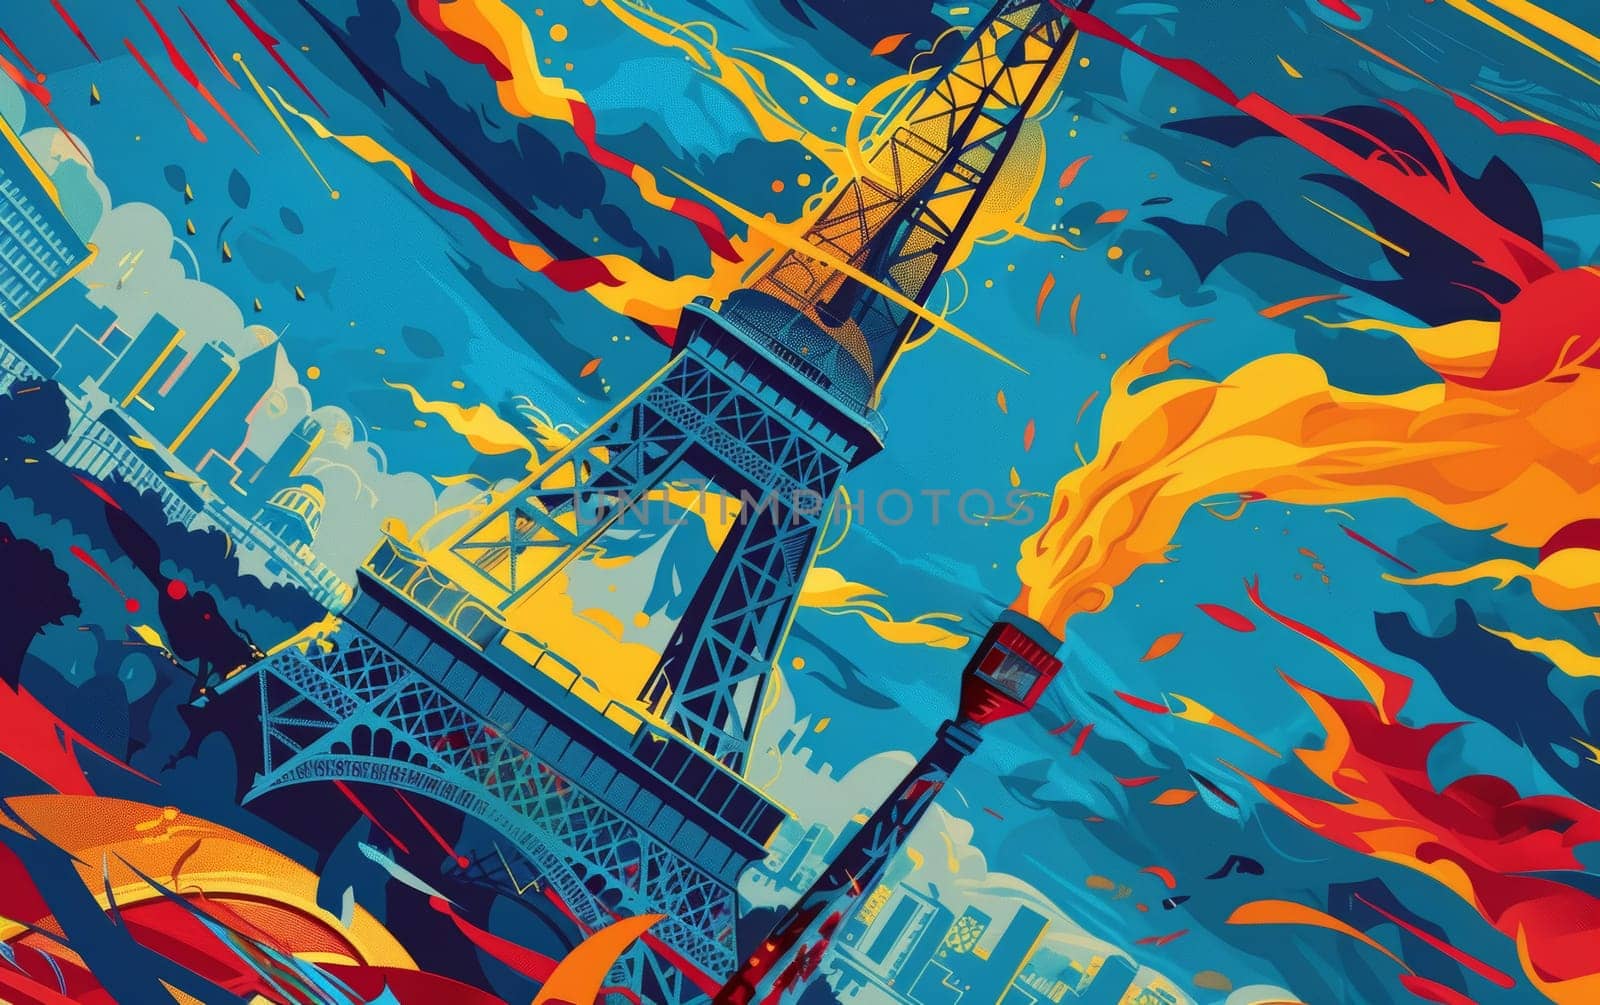 A vibrant, abstract representation of the Eiffel Tower surrounded by dynamic swirls and flames, rendered in a bold, graphic style